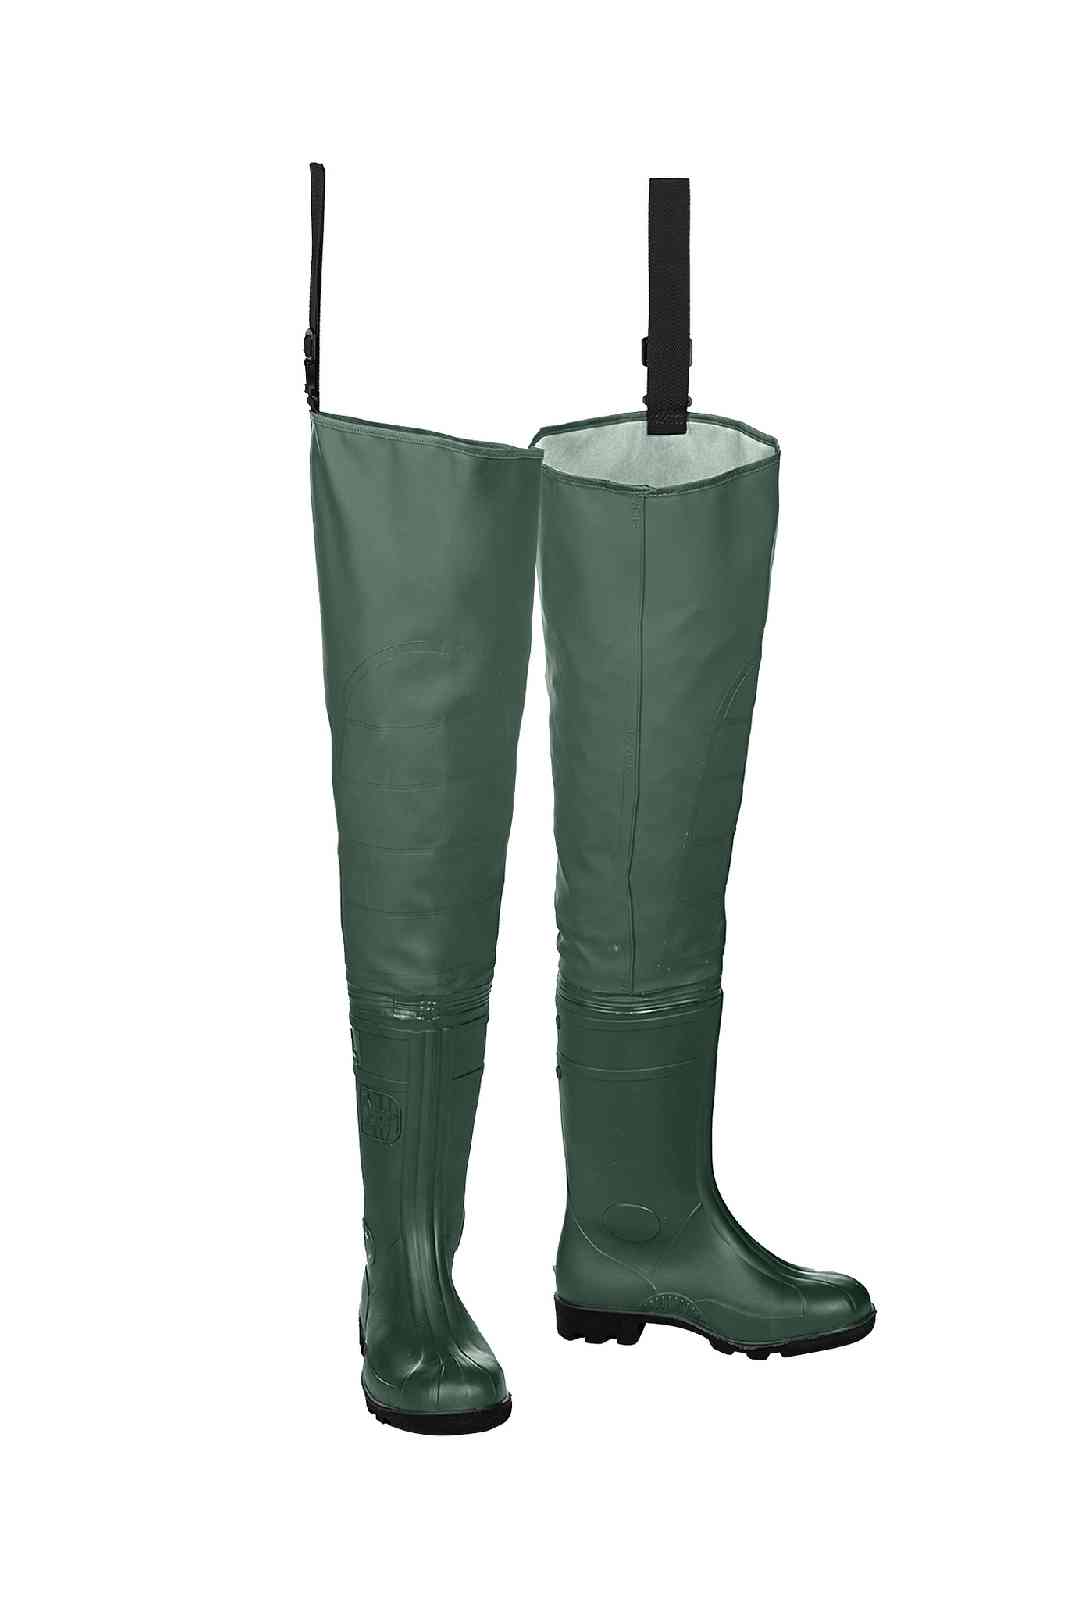 Sioen Largan Hip Wader with Safety Wellington Boots Green, Size UK 7